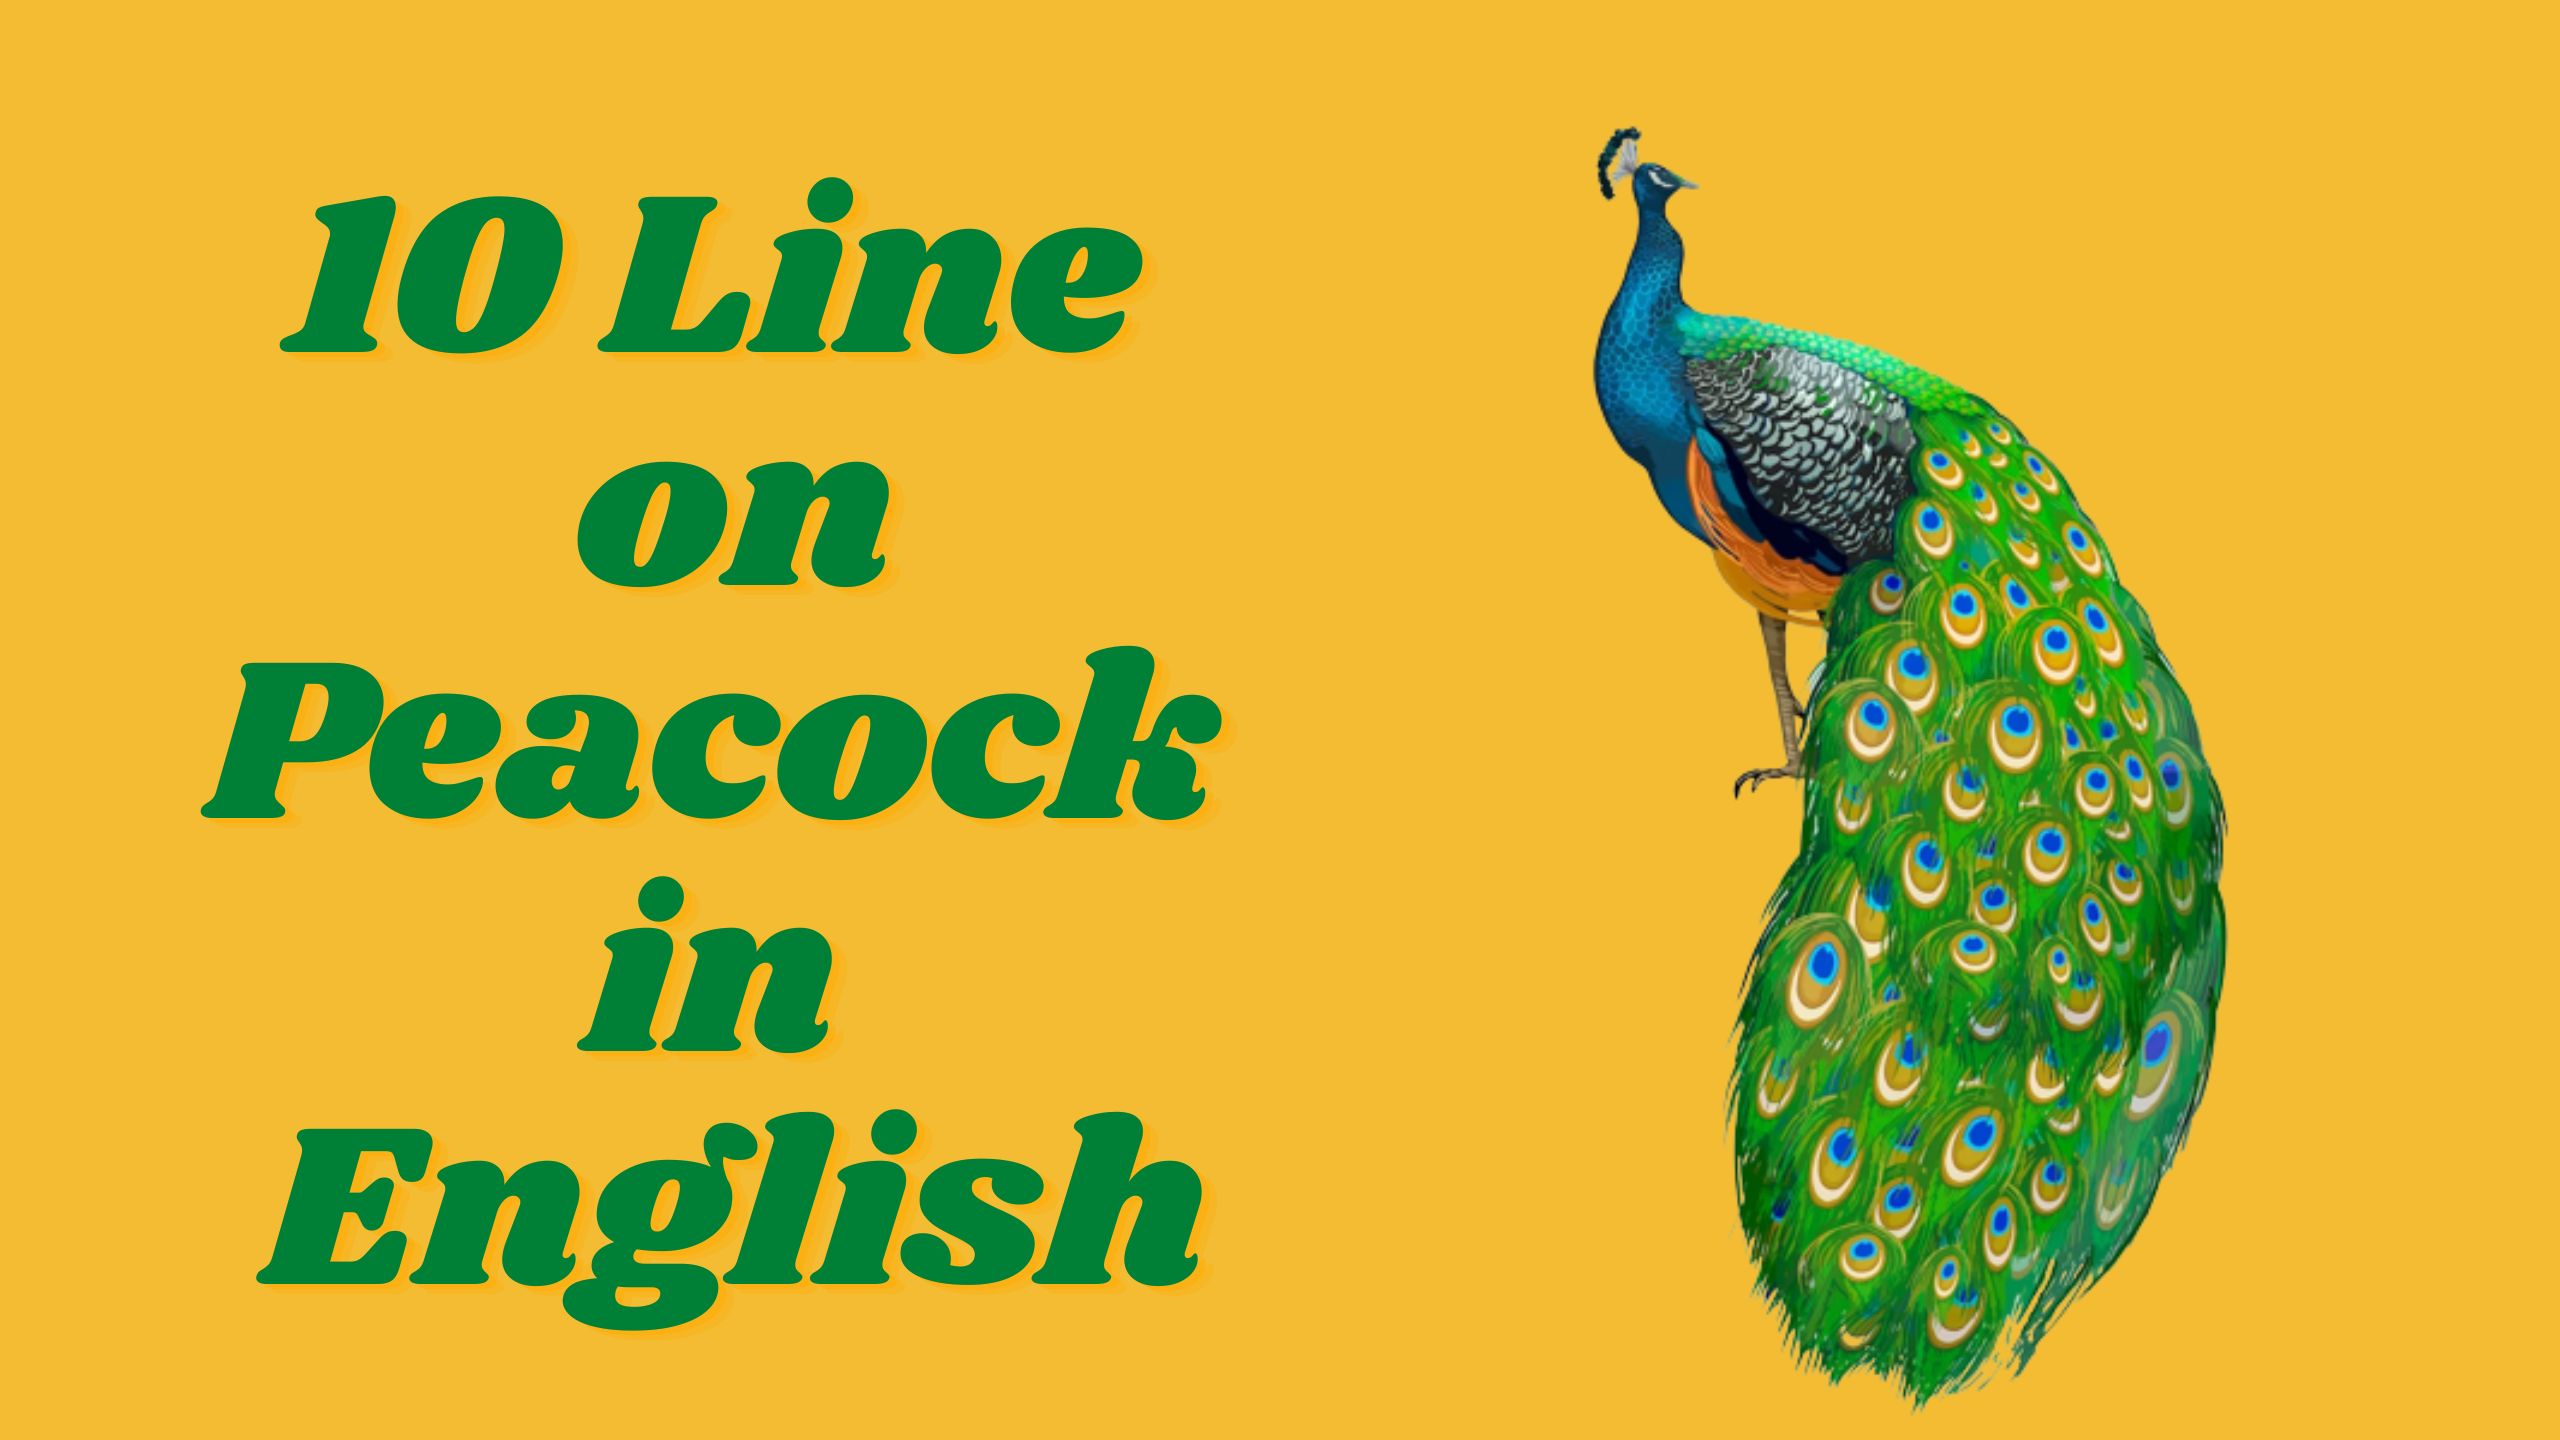 10 Lines on peacock